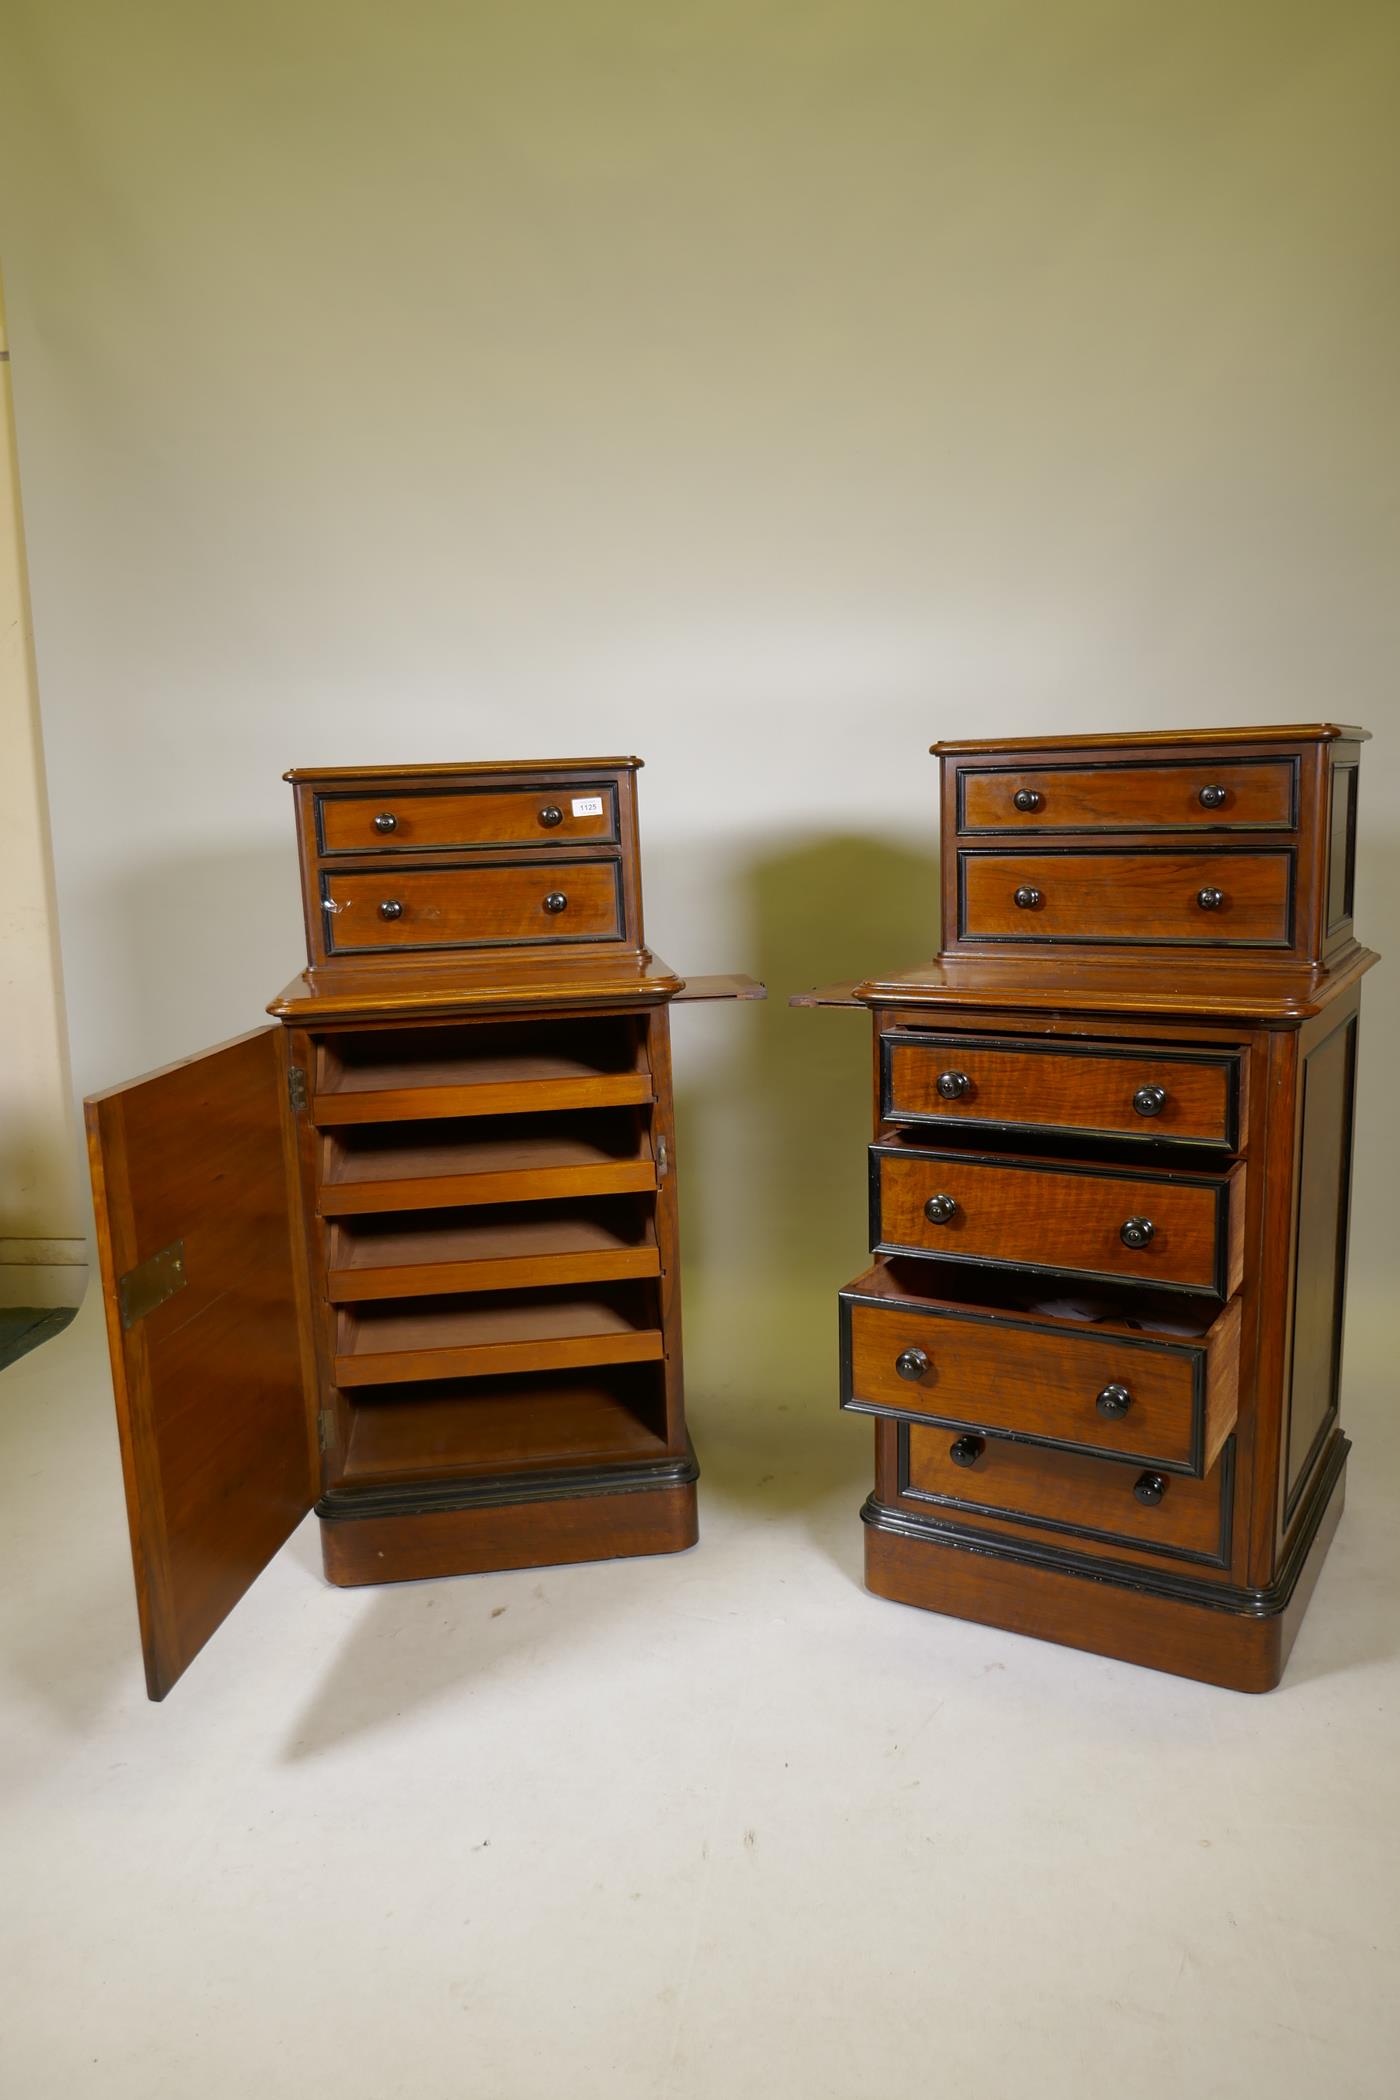 A pair of C19th walnut cabinets with ebony mouldings, one with six drawers, the other two drawers - Image 2 of 8